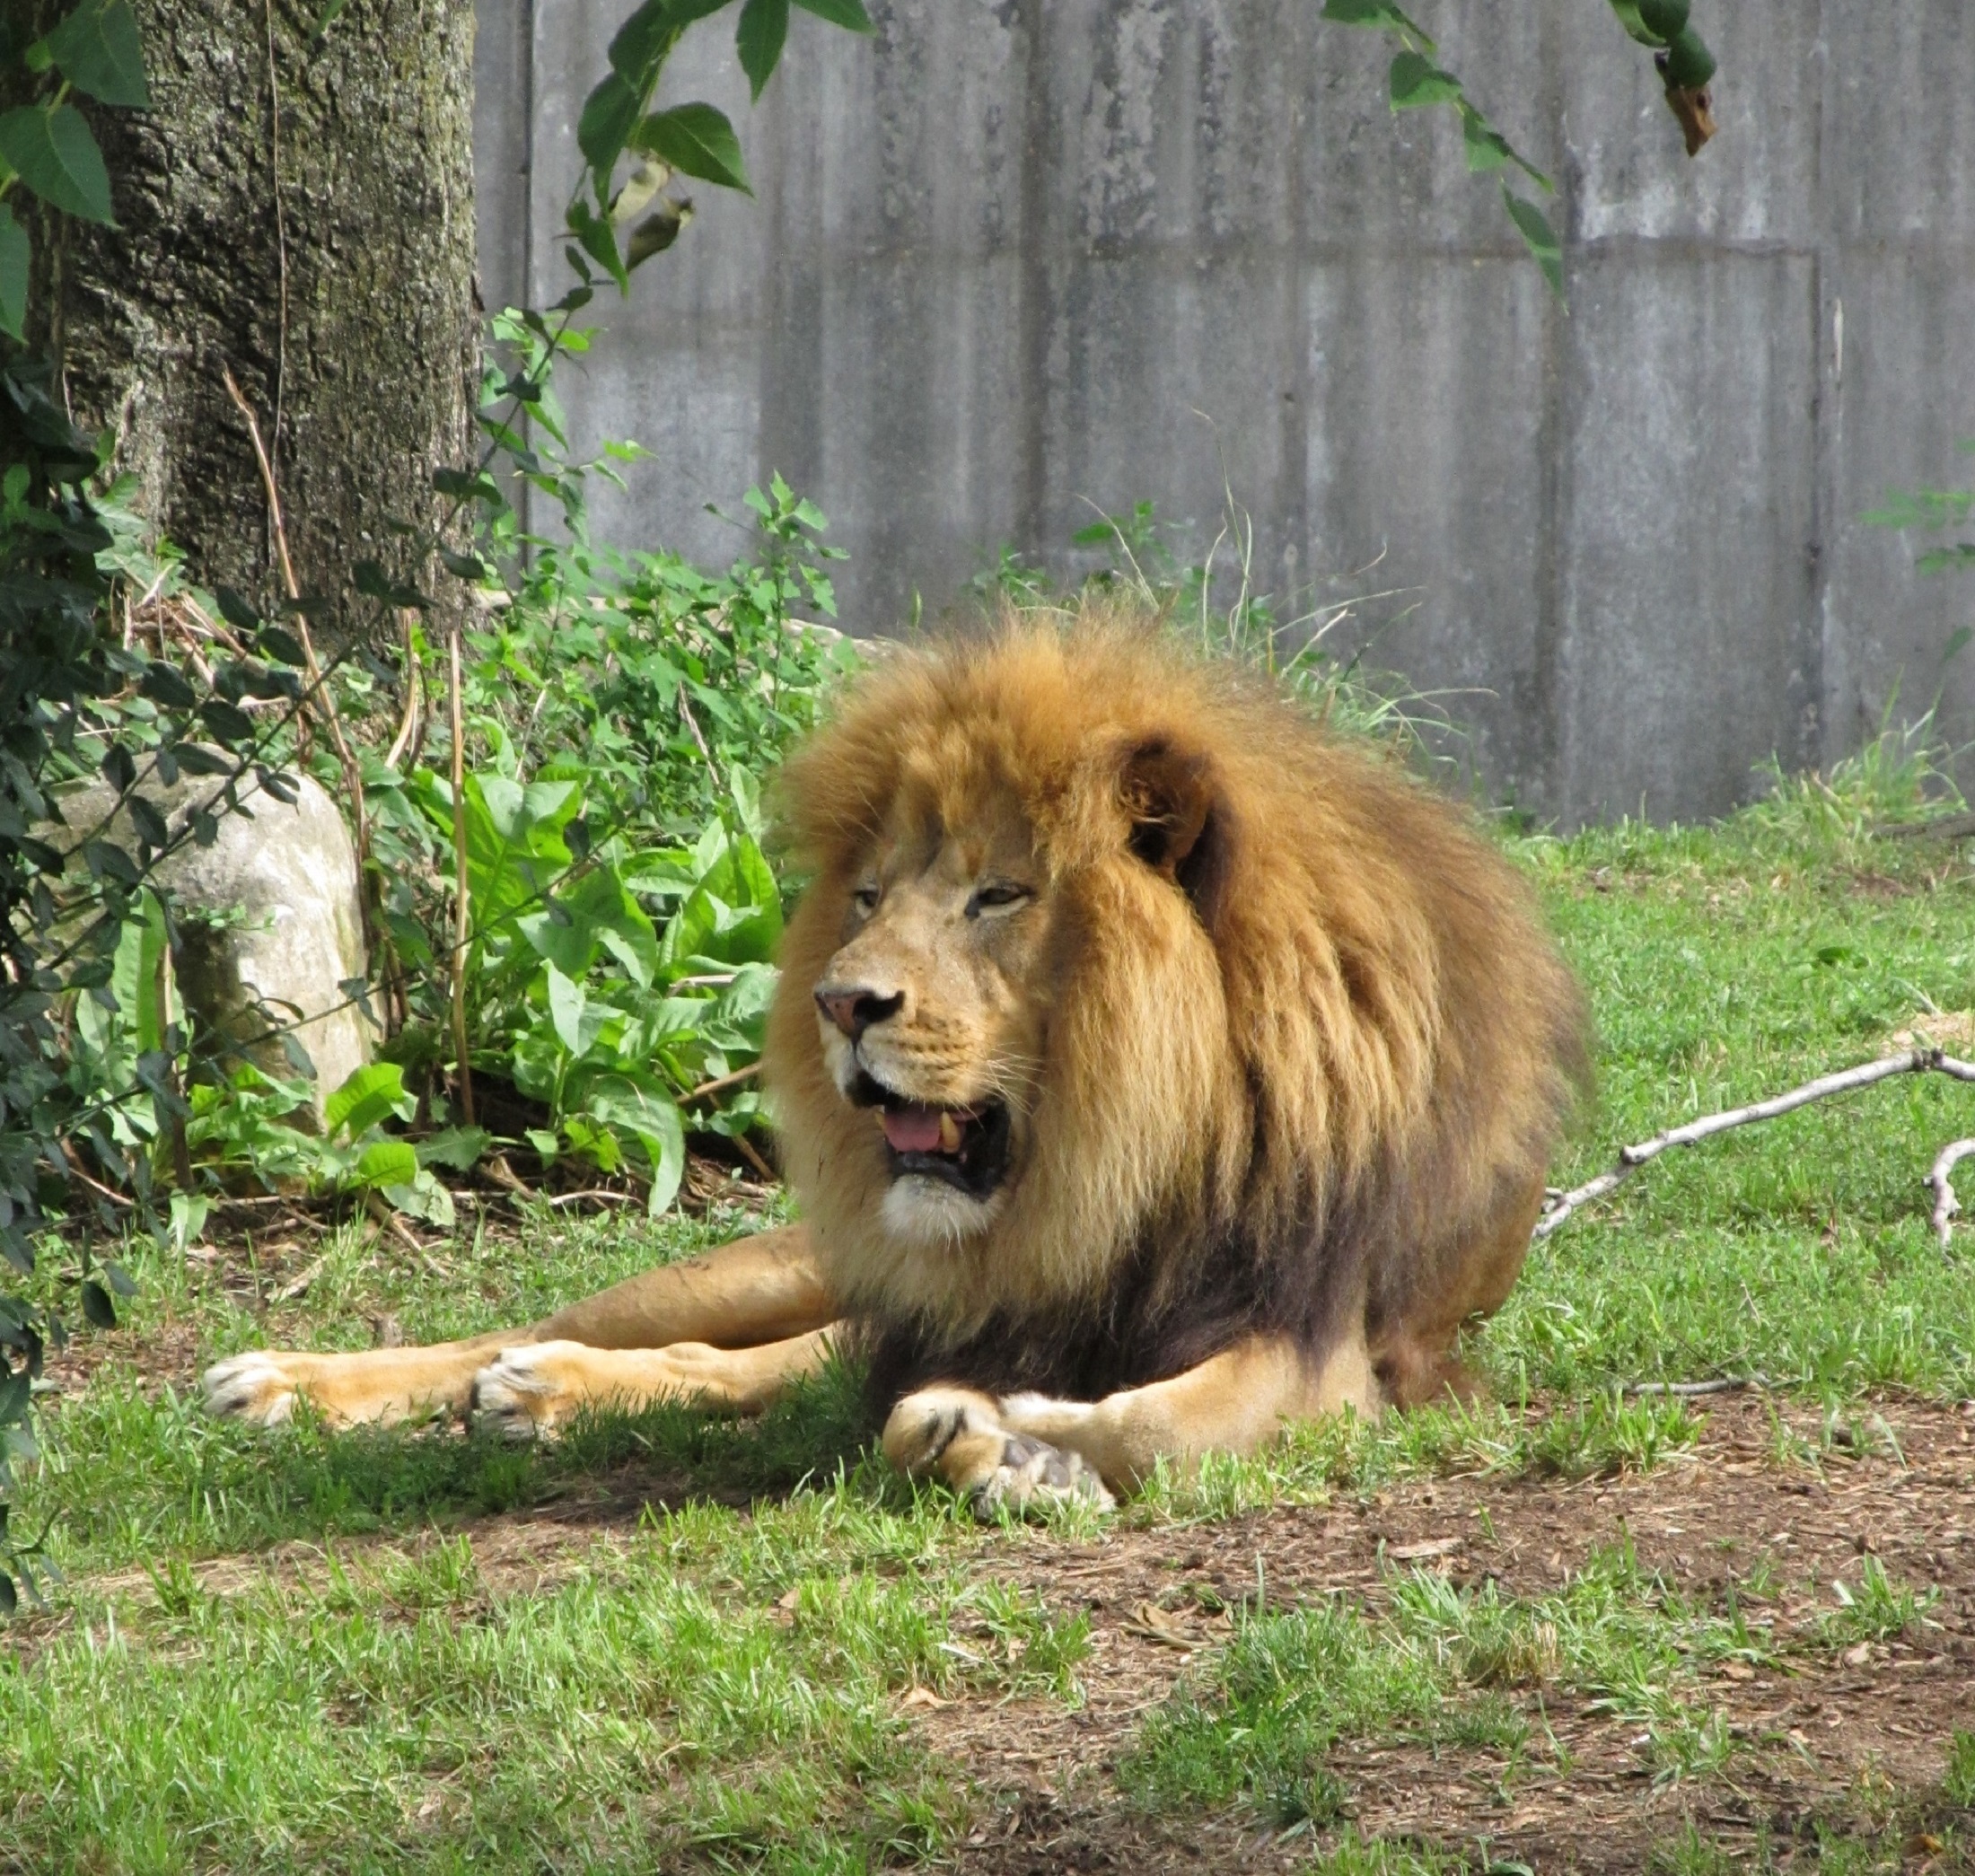 King of the jungle photo